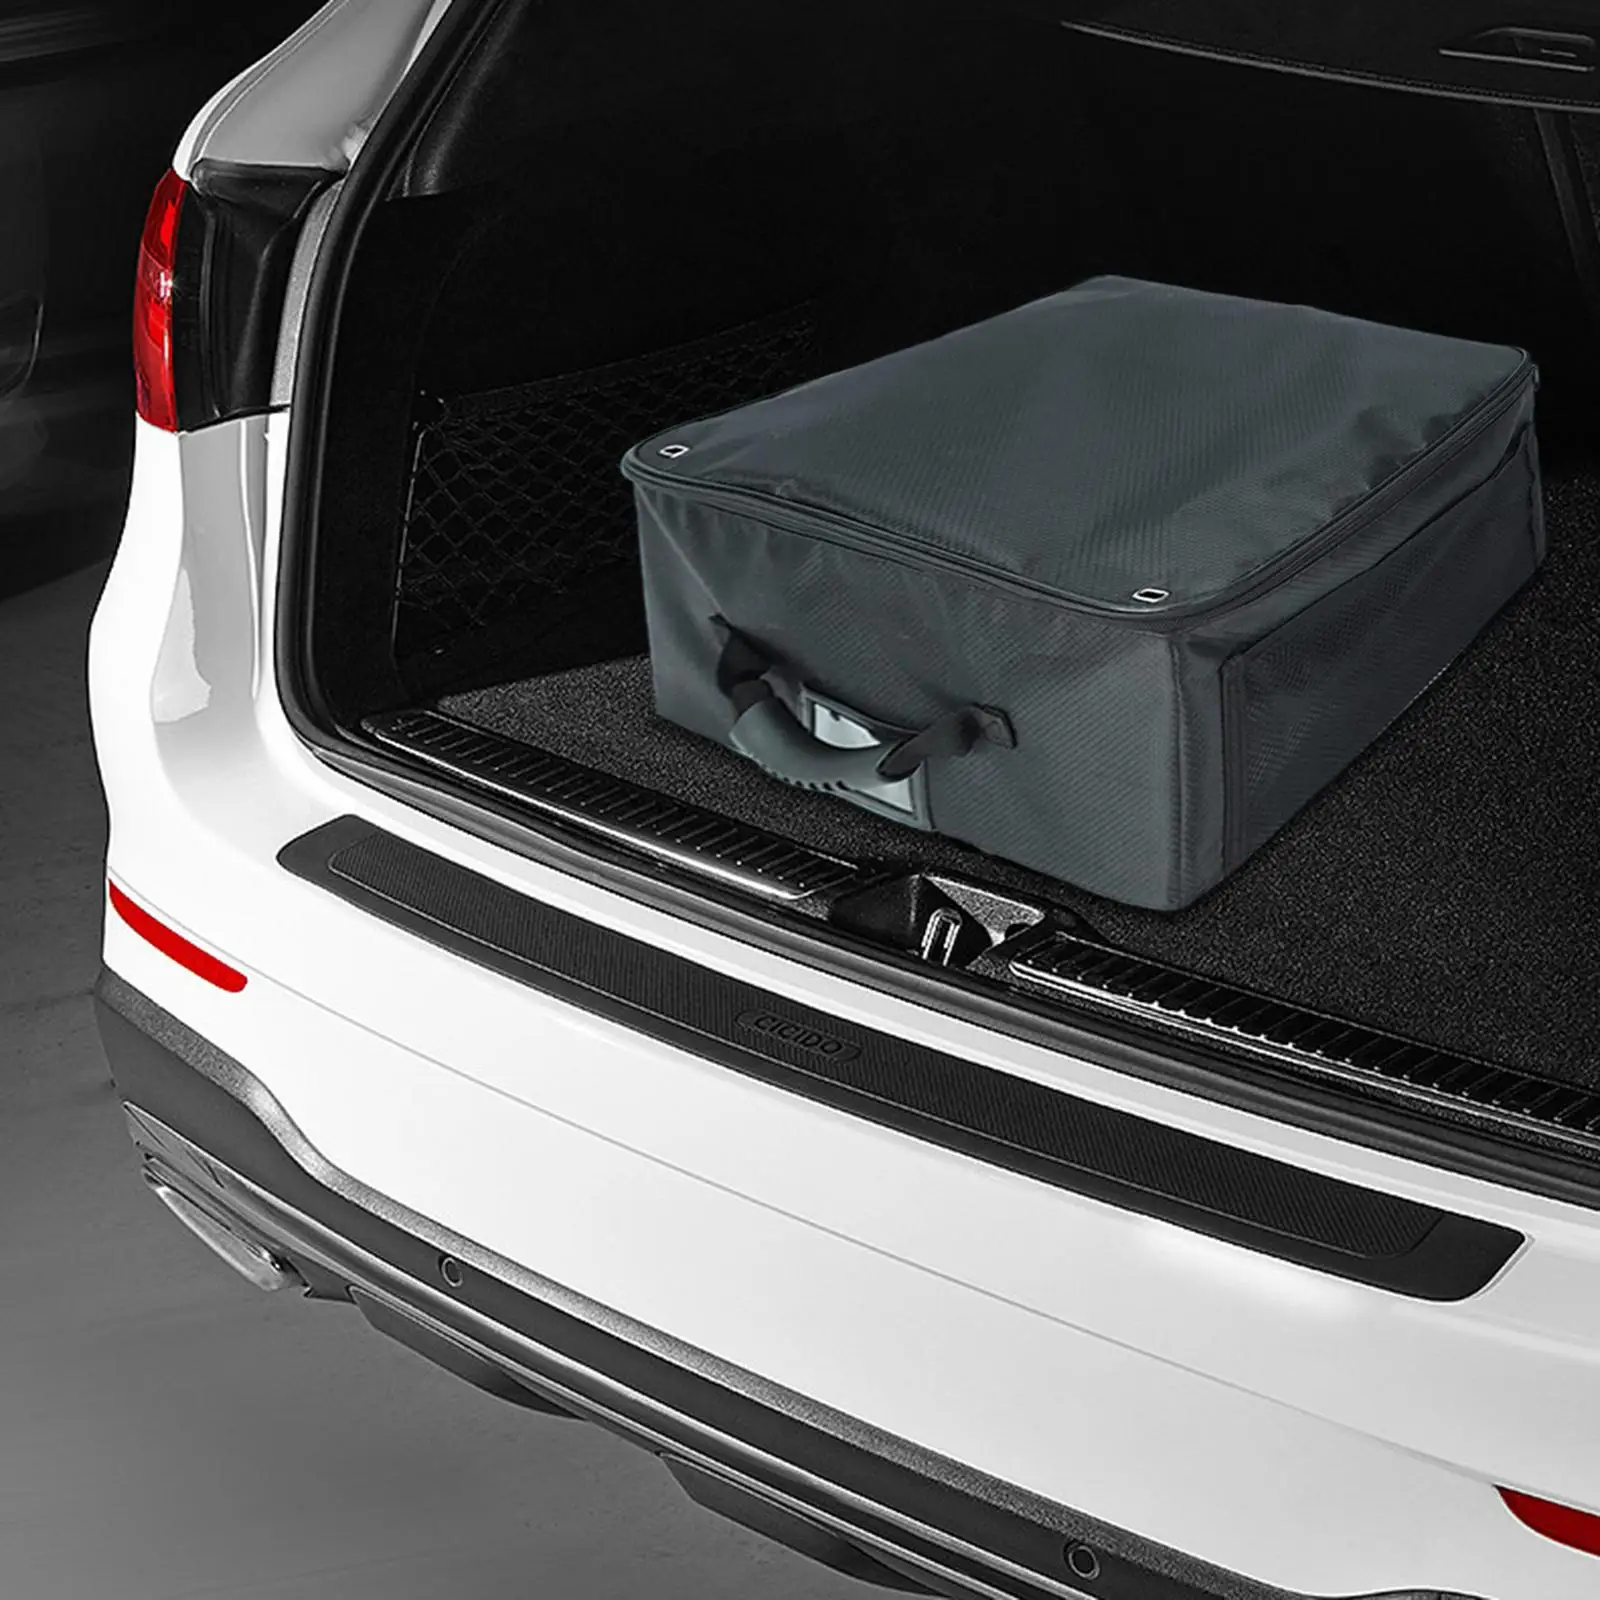 Car Trunk Organizer with Lid Adjustable Compartments Holder Waterproof Collapsible Oxford Cloth Golf Storage Box for Travel